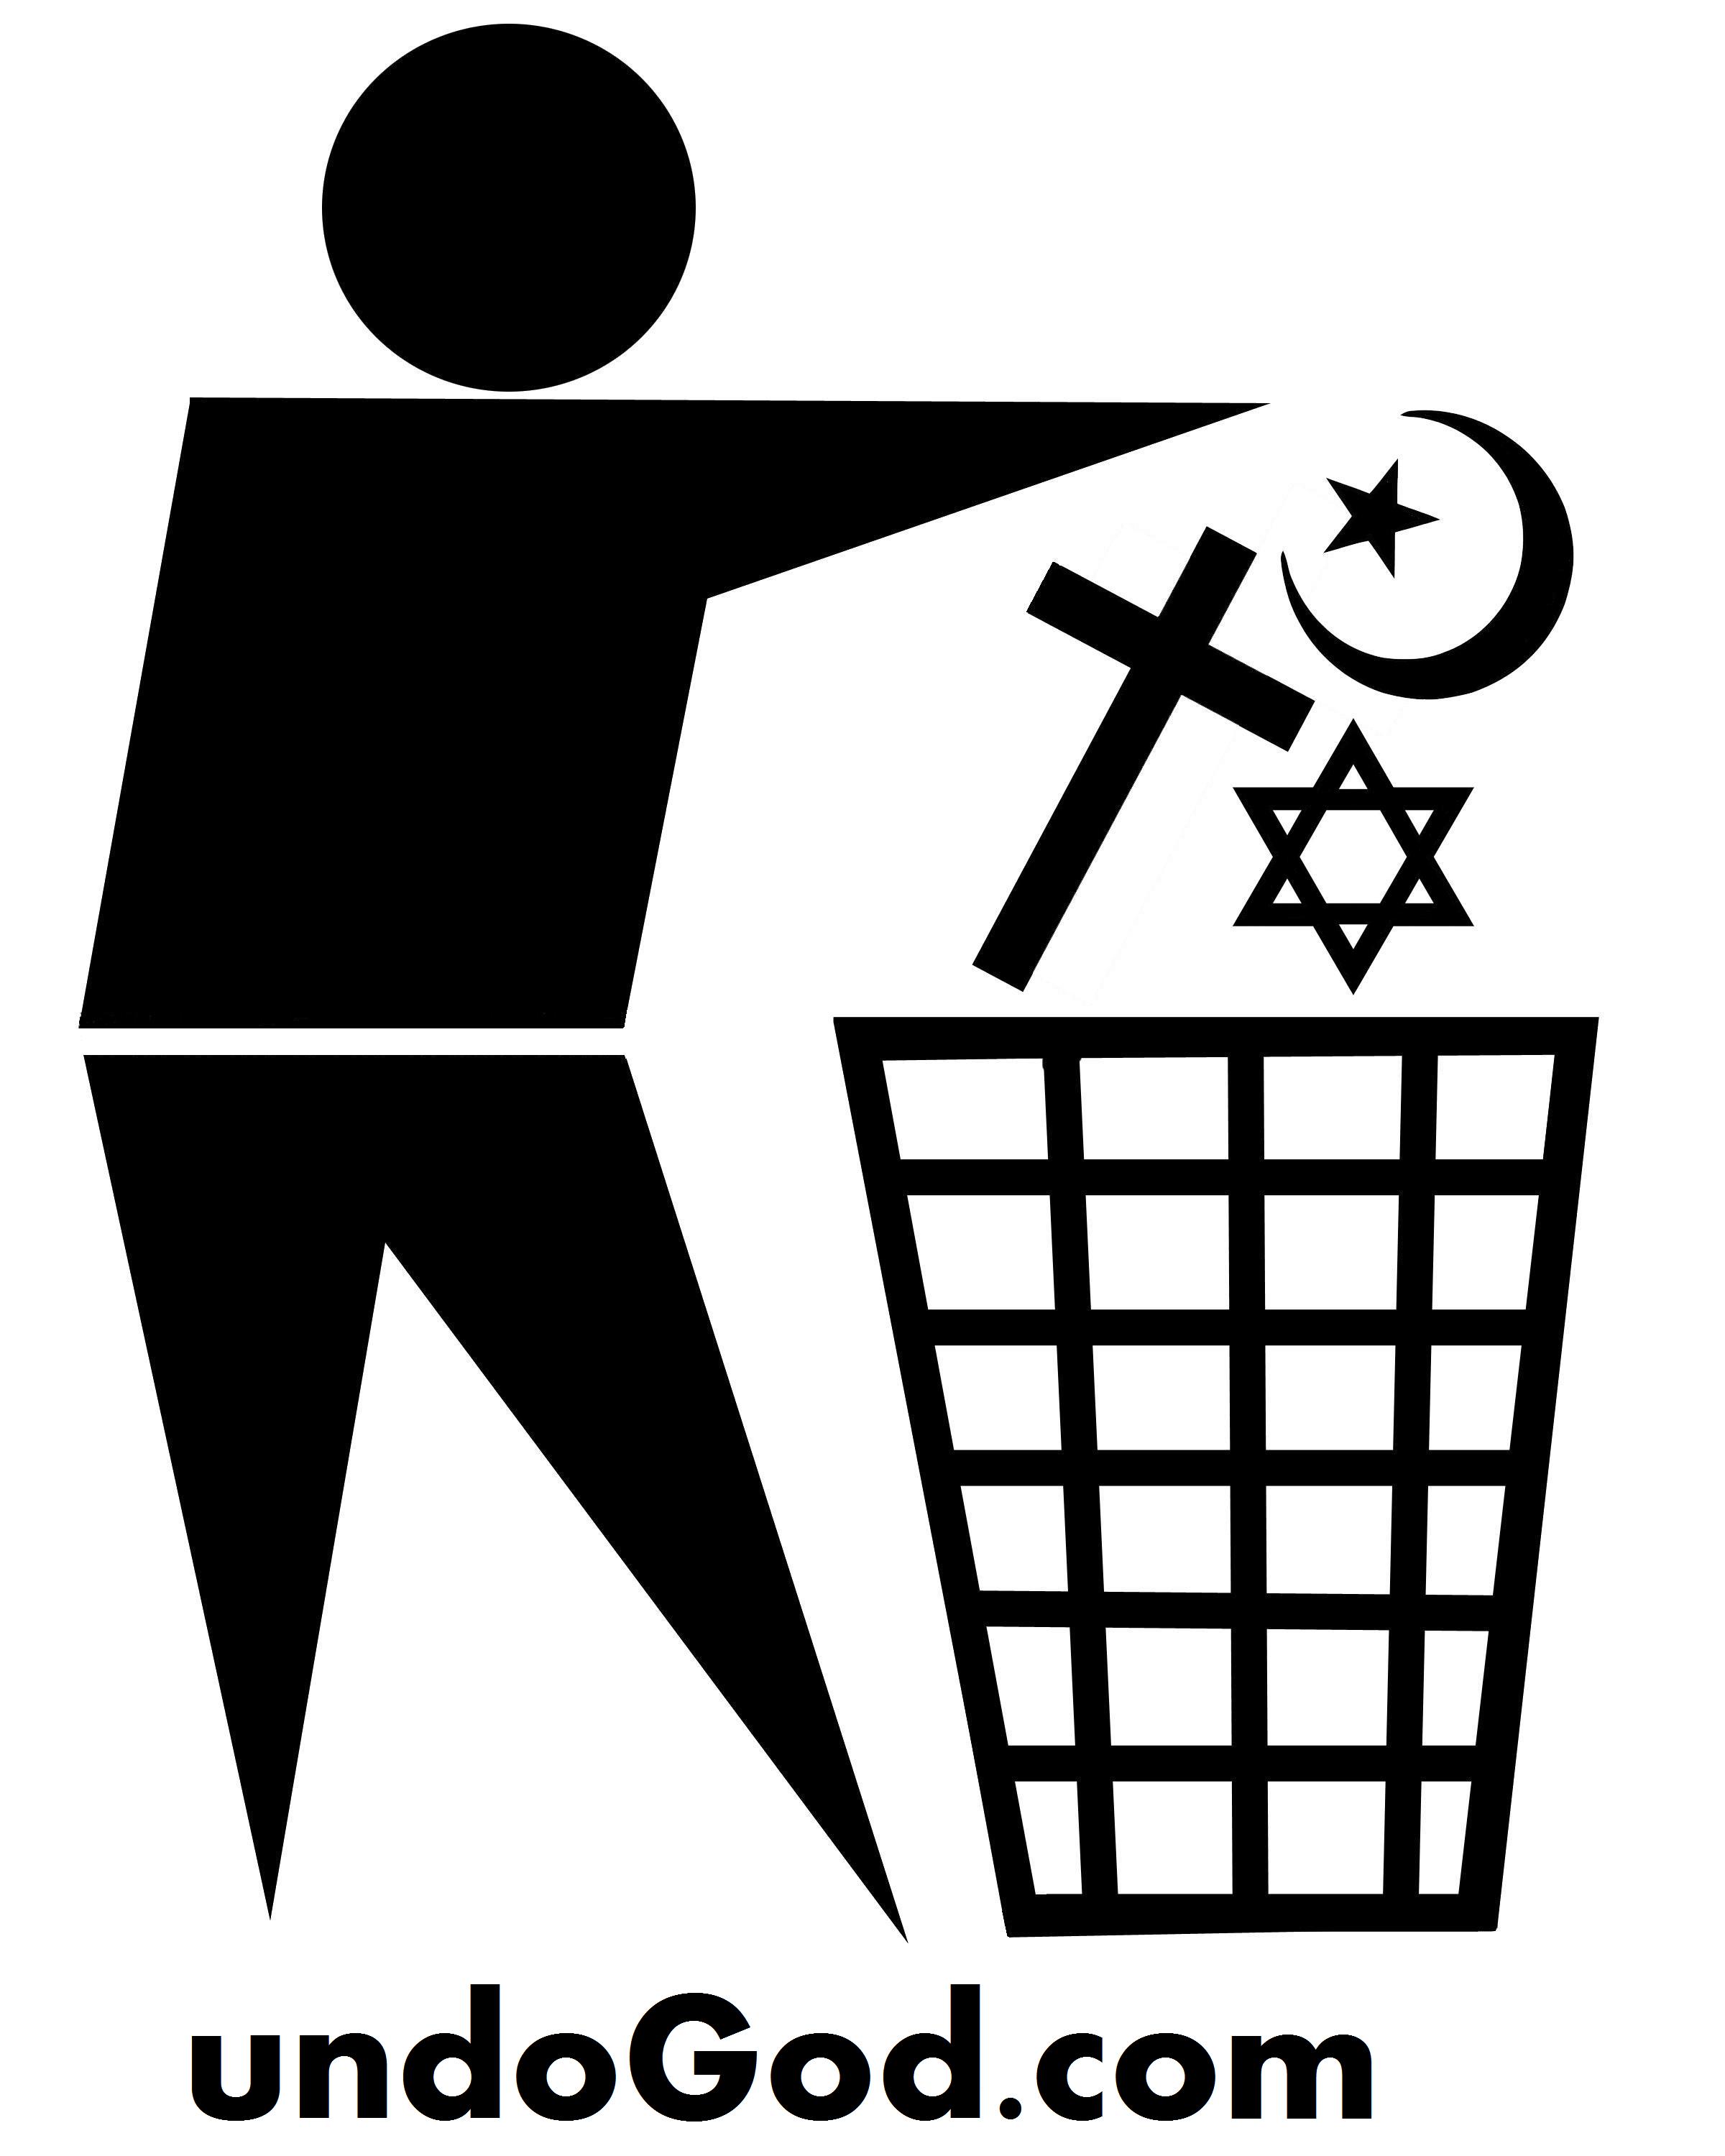 standard waste bin sign with religious symbols being discarded